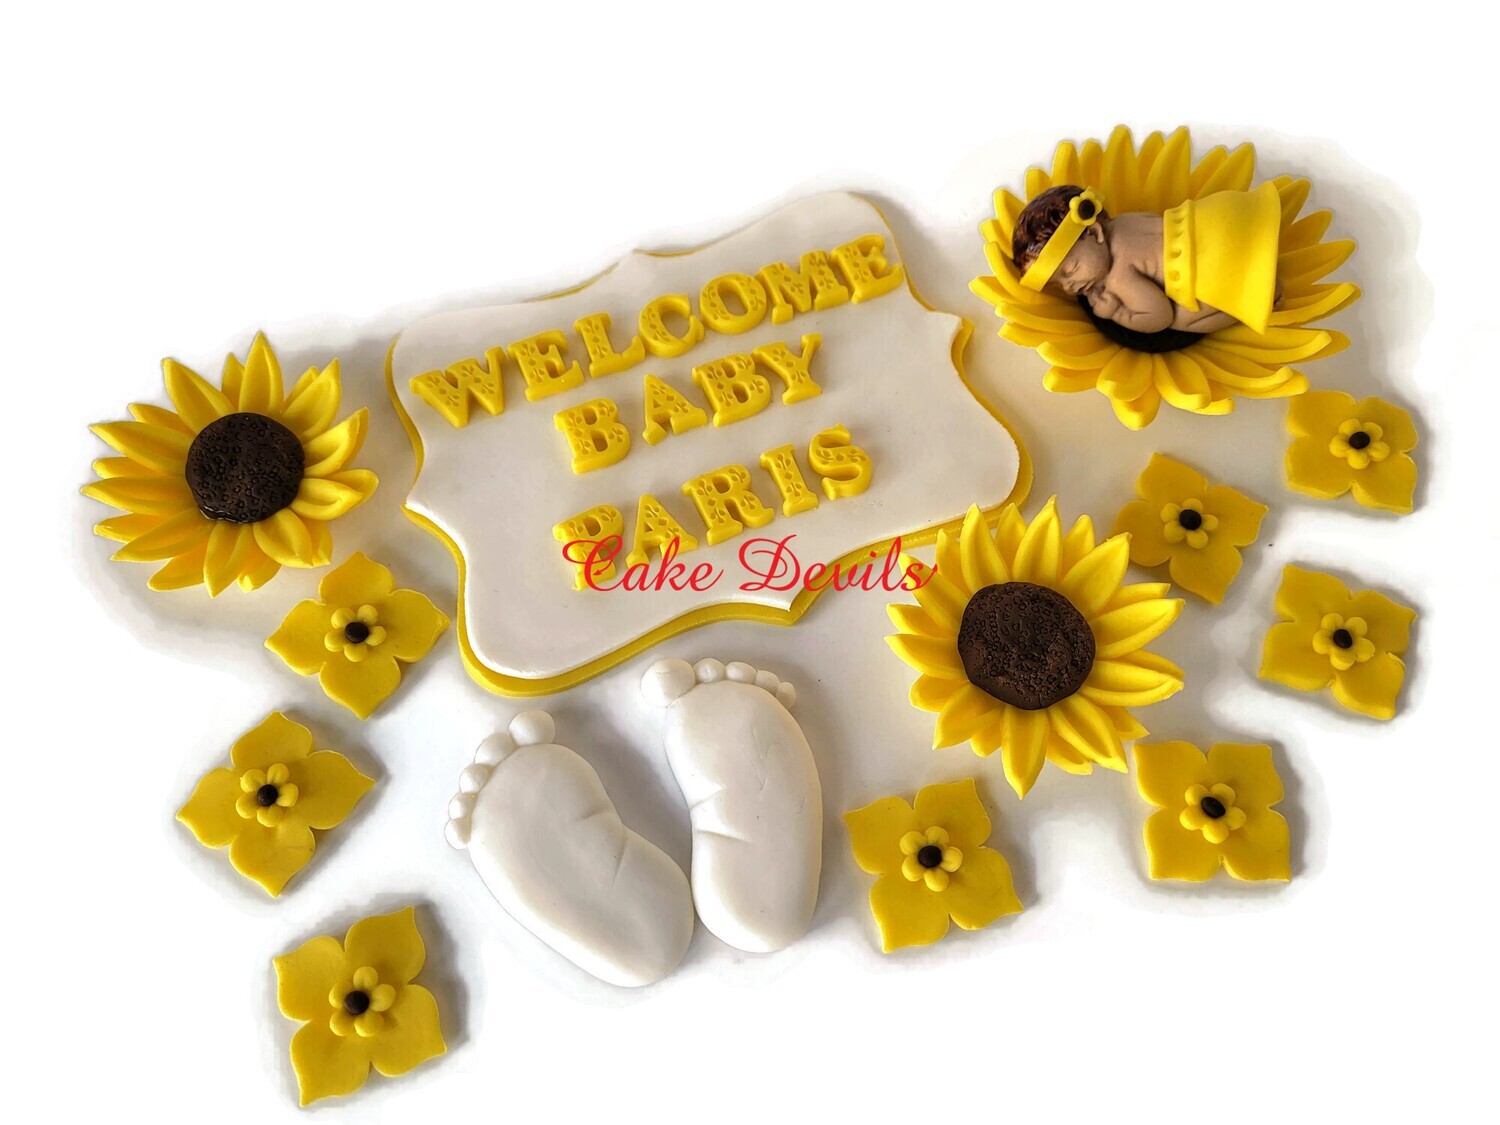 Fondant Sunflower Baby Shower Cake Toppers with baby, plaque and baby feet